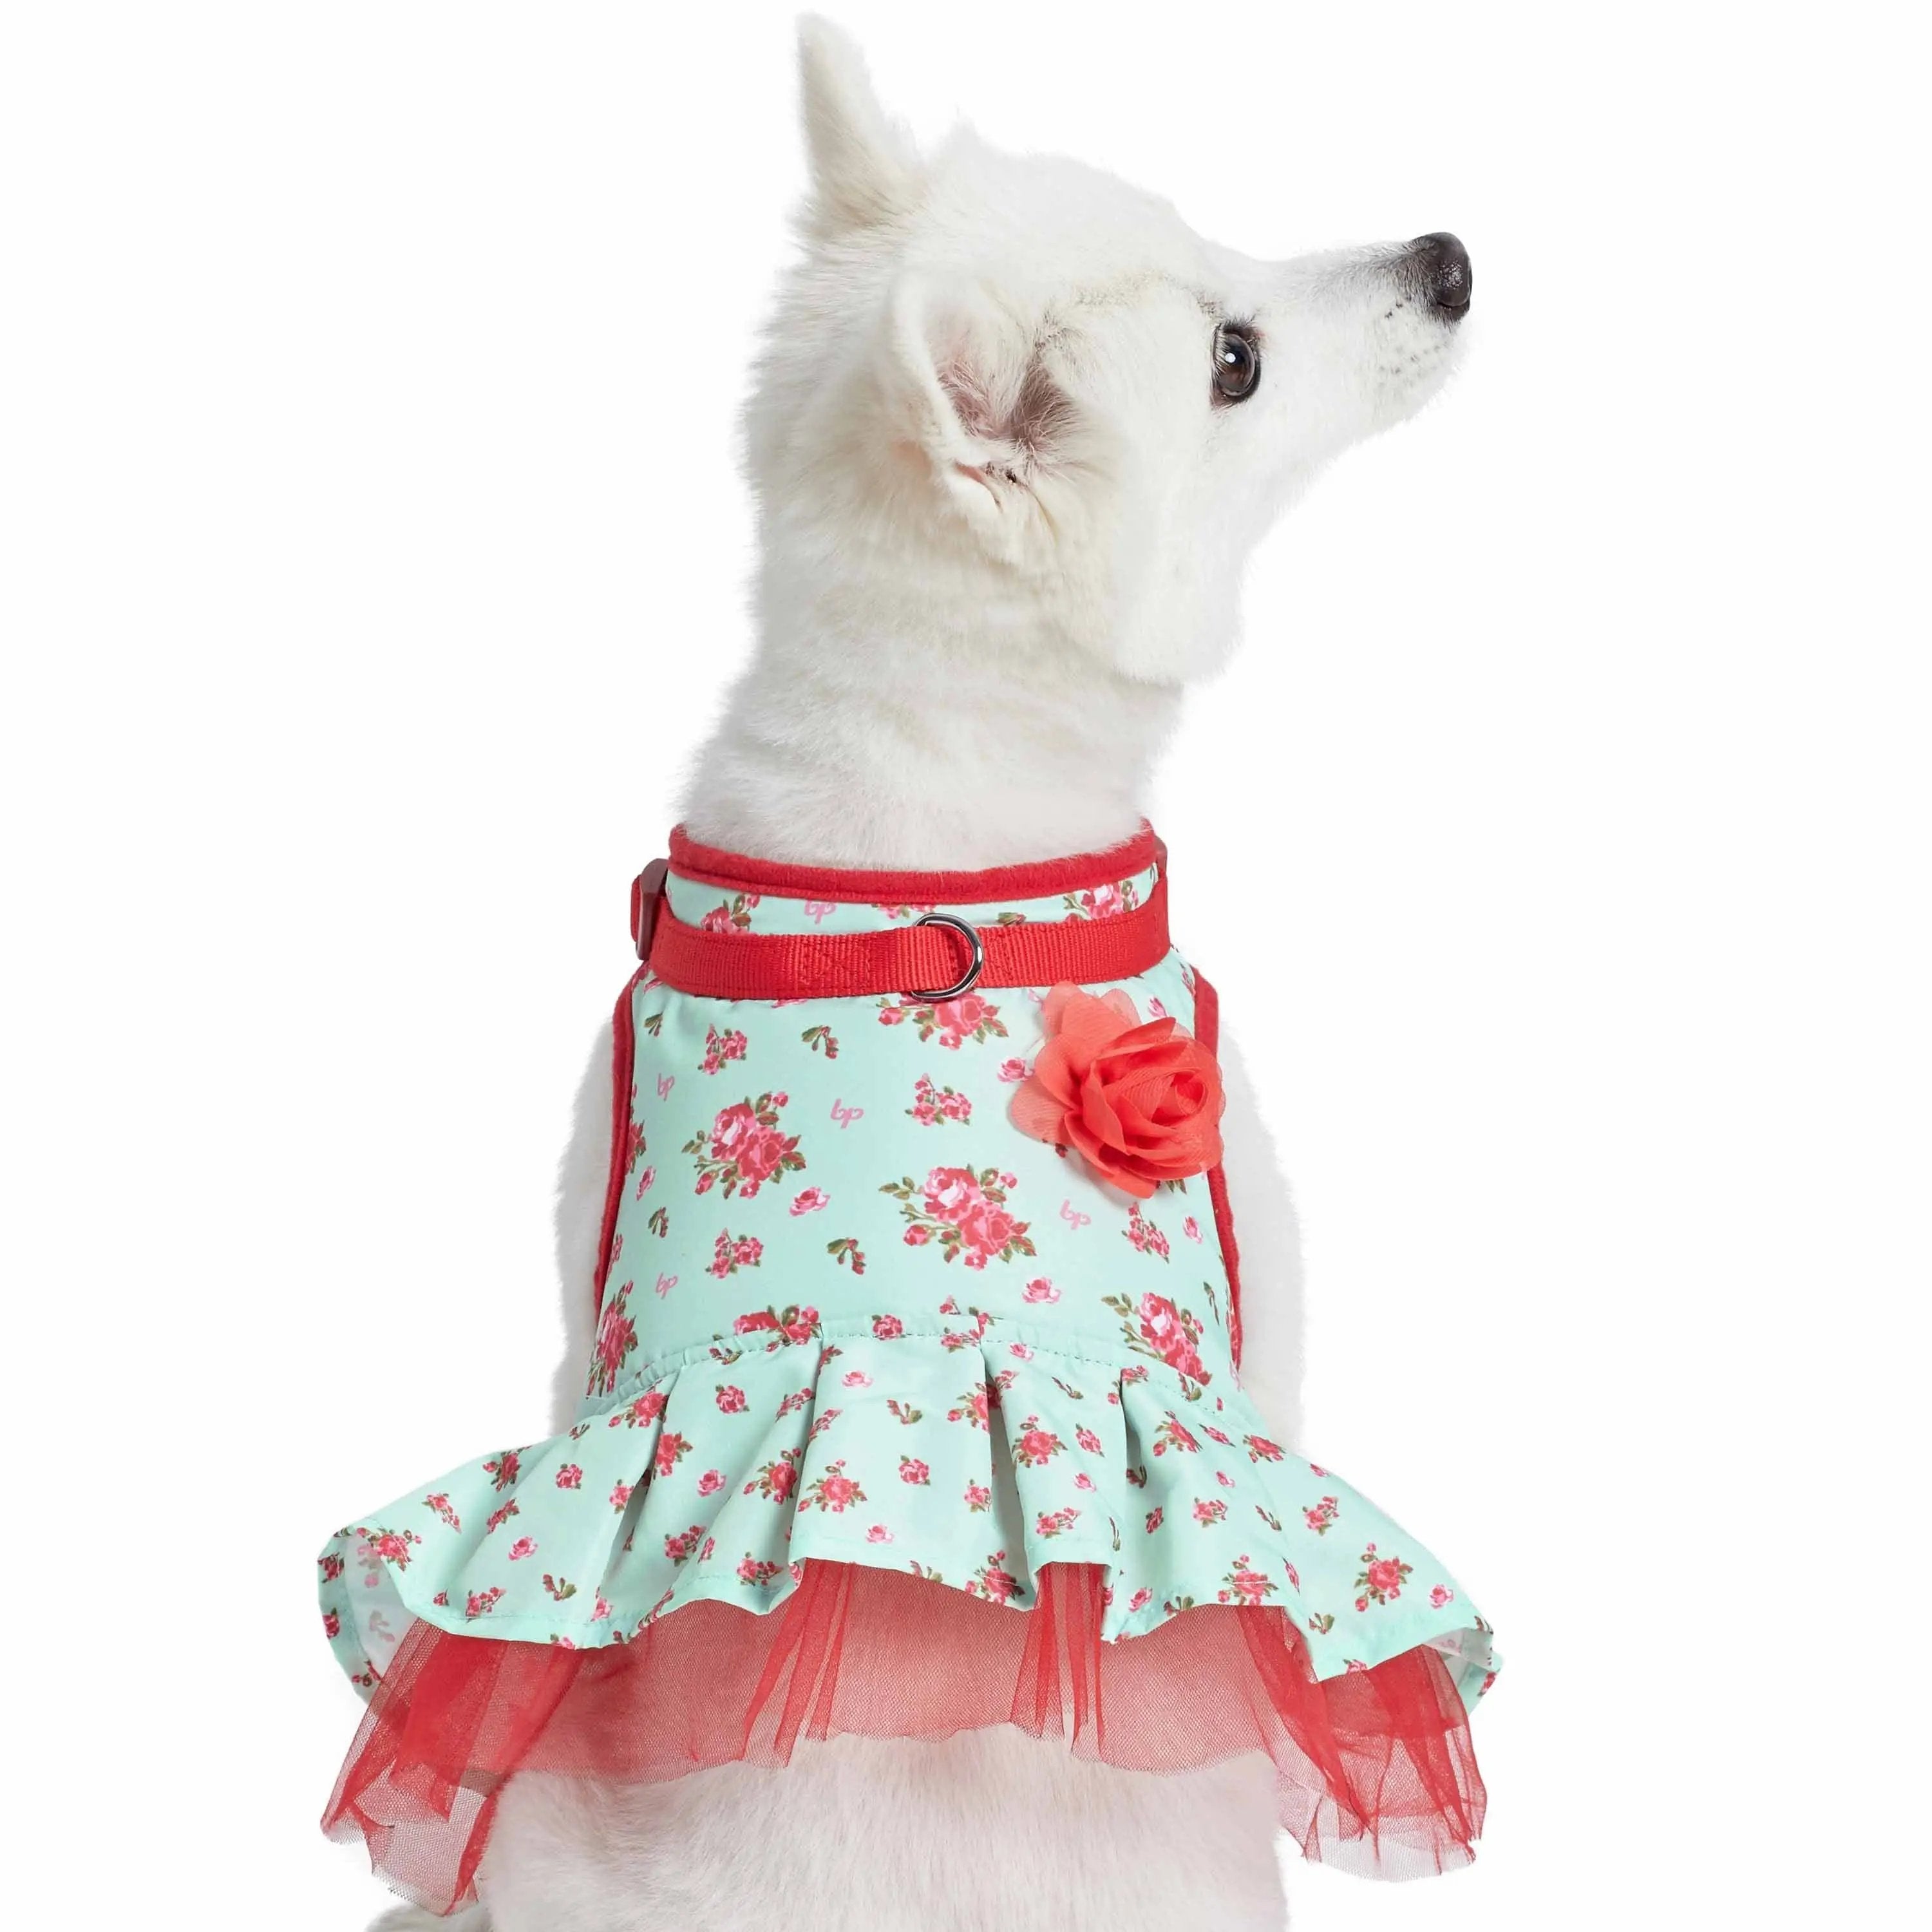 Blueberry Pet - 3 Colors, Made Well Floral Dog Dress Harness